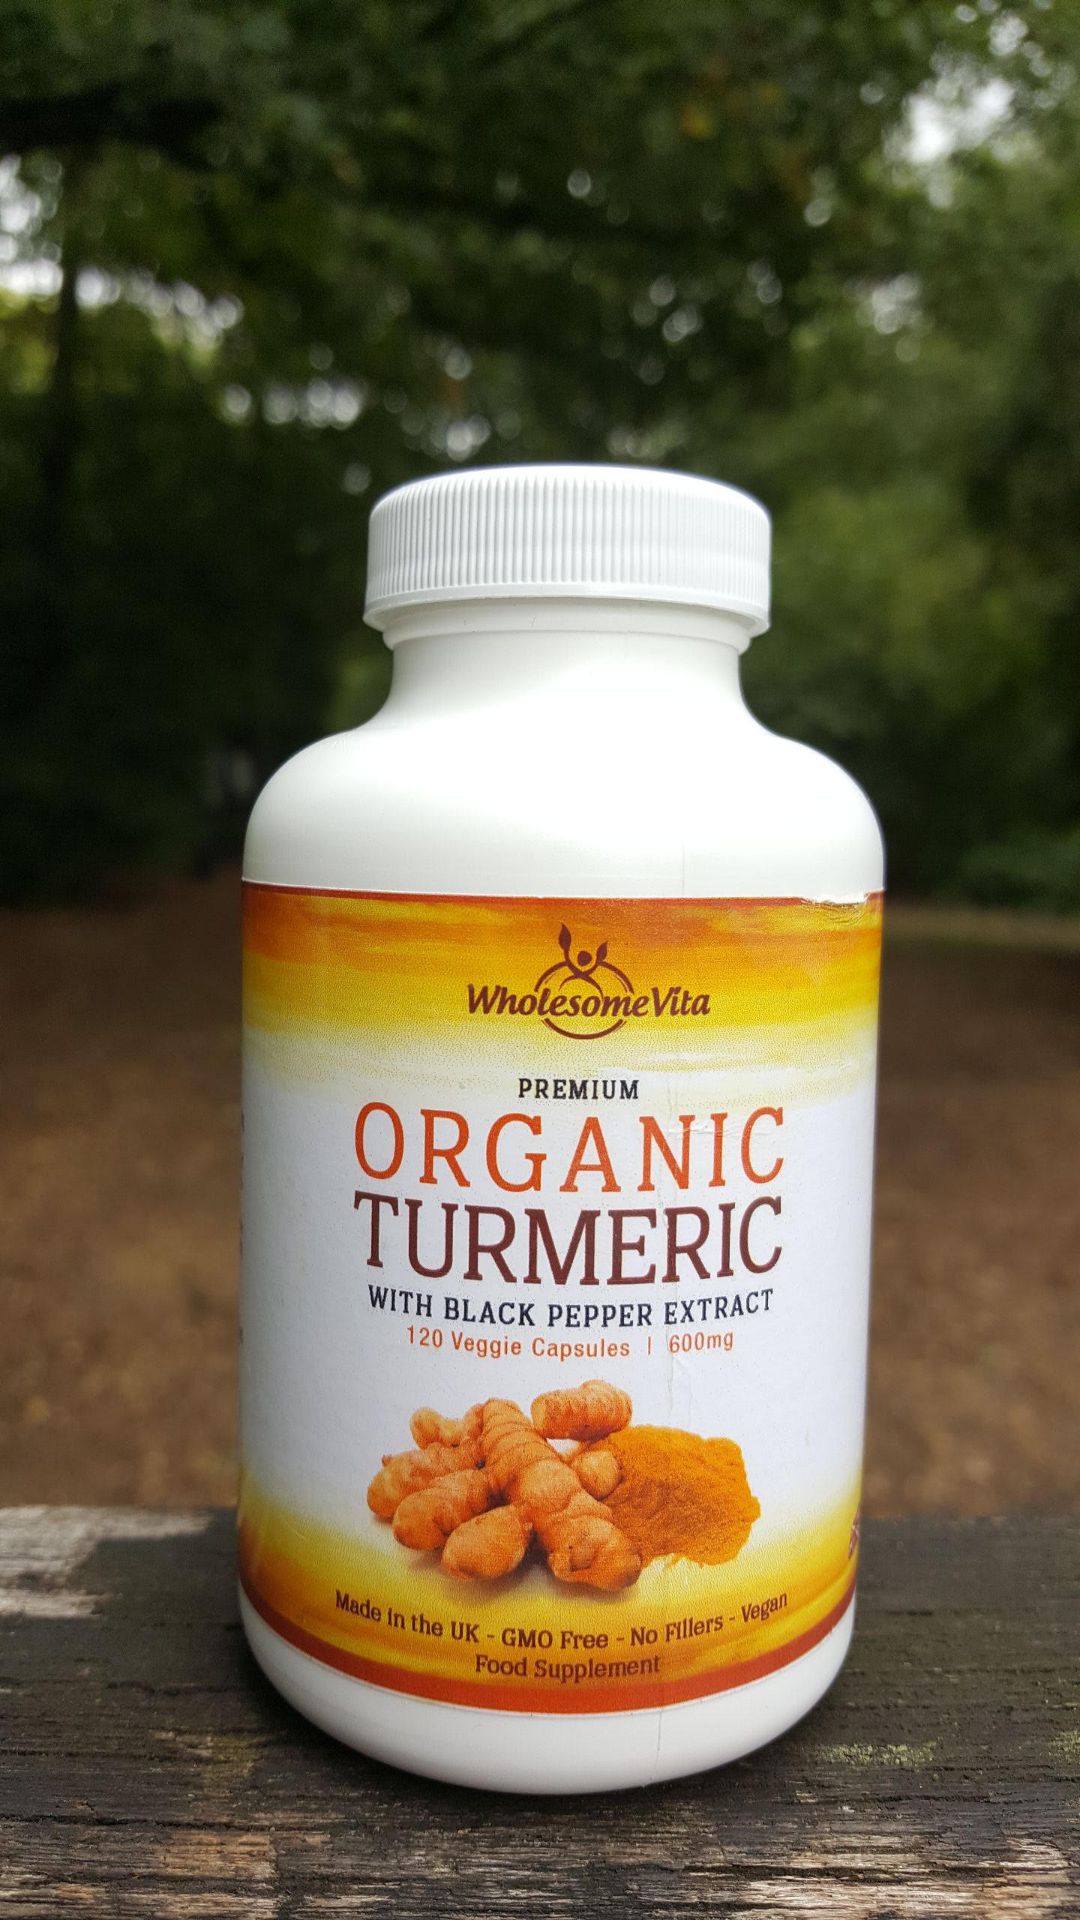 216 bottles Free Deliver Organic Turmeric and Piperine Capsules. Each bottle contain 120 capsules.